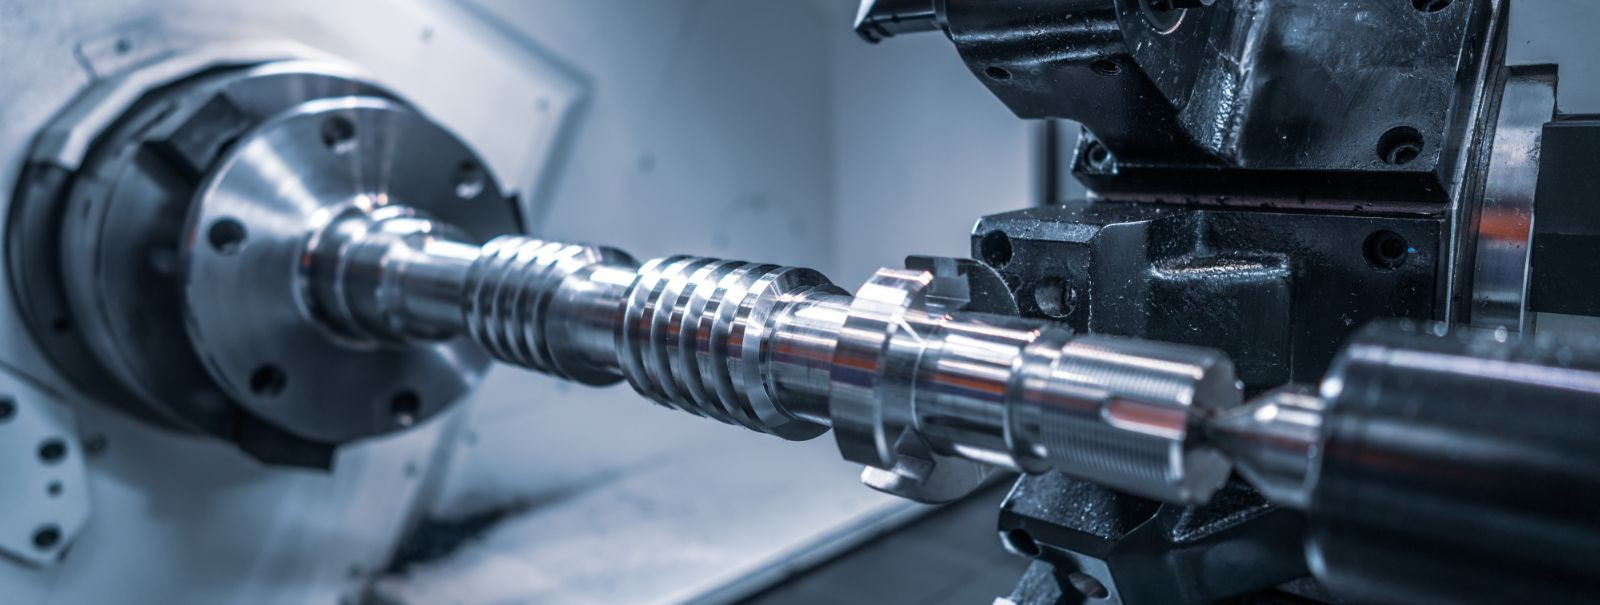 In industries such as oil and gas, machine-building, and wind energy, the margin for error is minimal. Precision parts fabrication is not just a requirement but